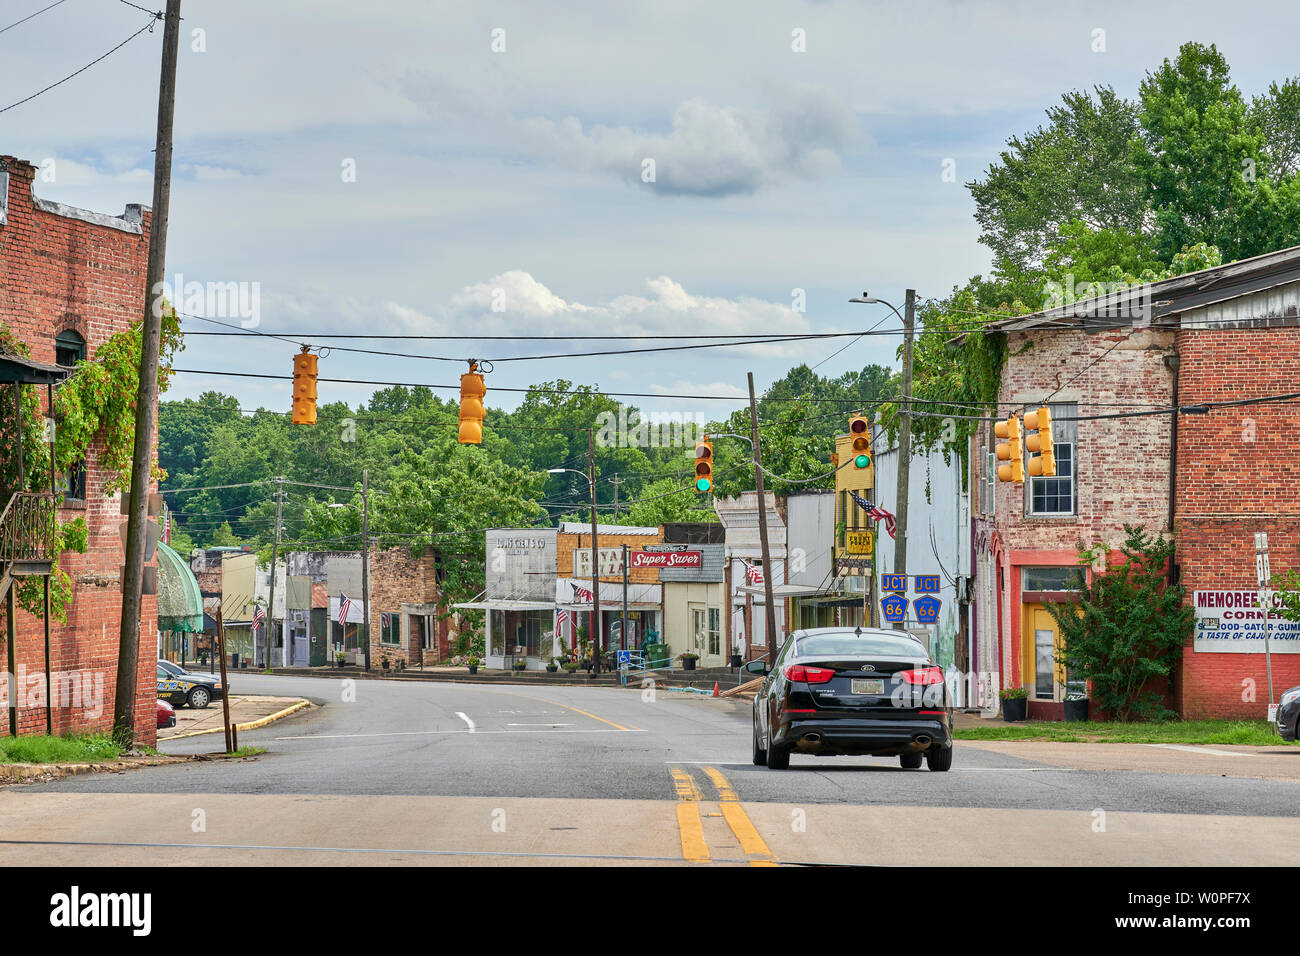 A single car driving on the main street of a small town in rural America, Goodwater Alabama, USA. Stock Photo